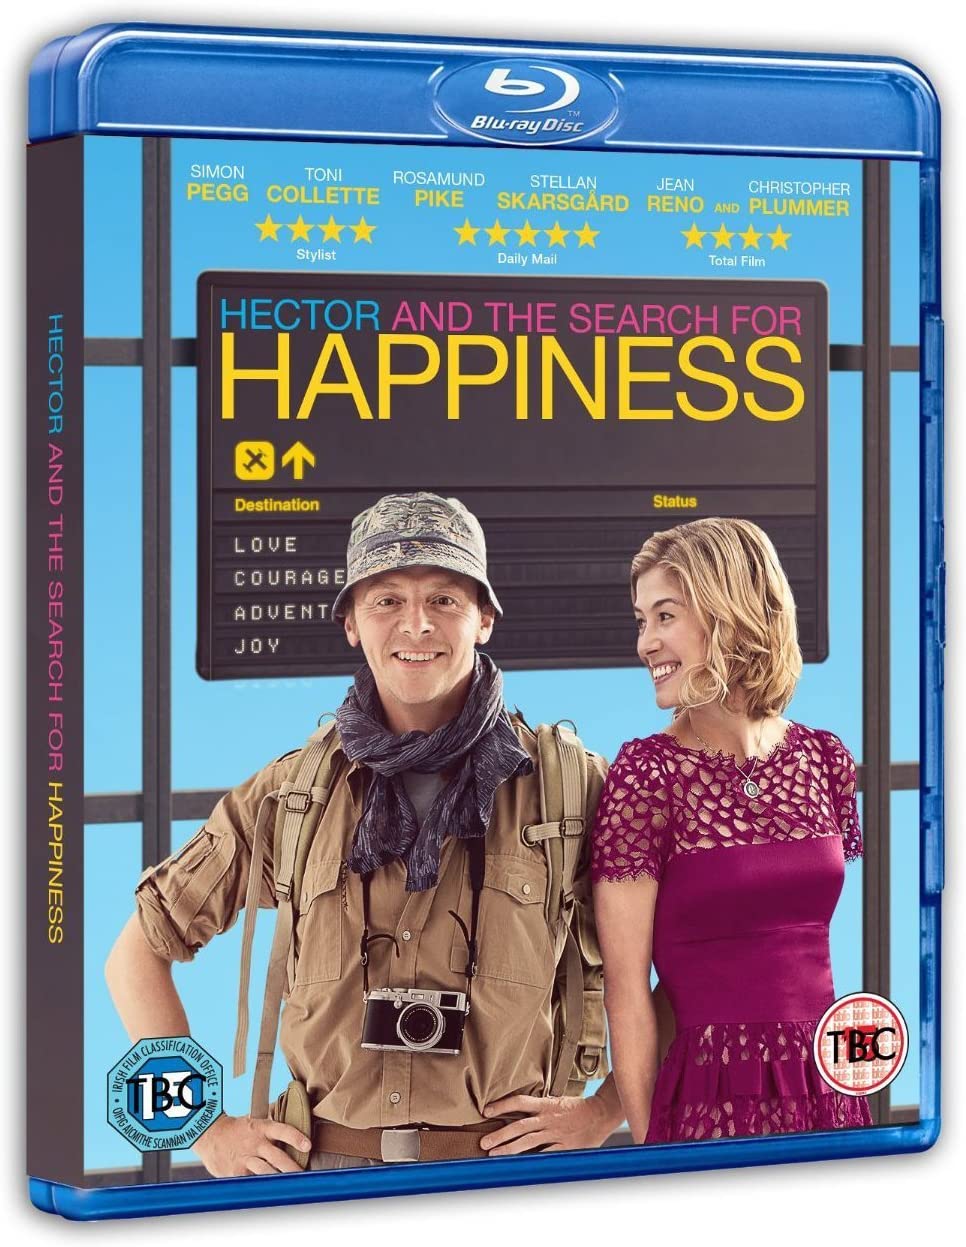 Hector And The Search For Happiness [2014] (Blu-ray)